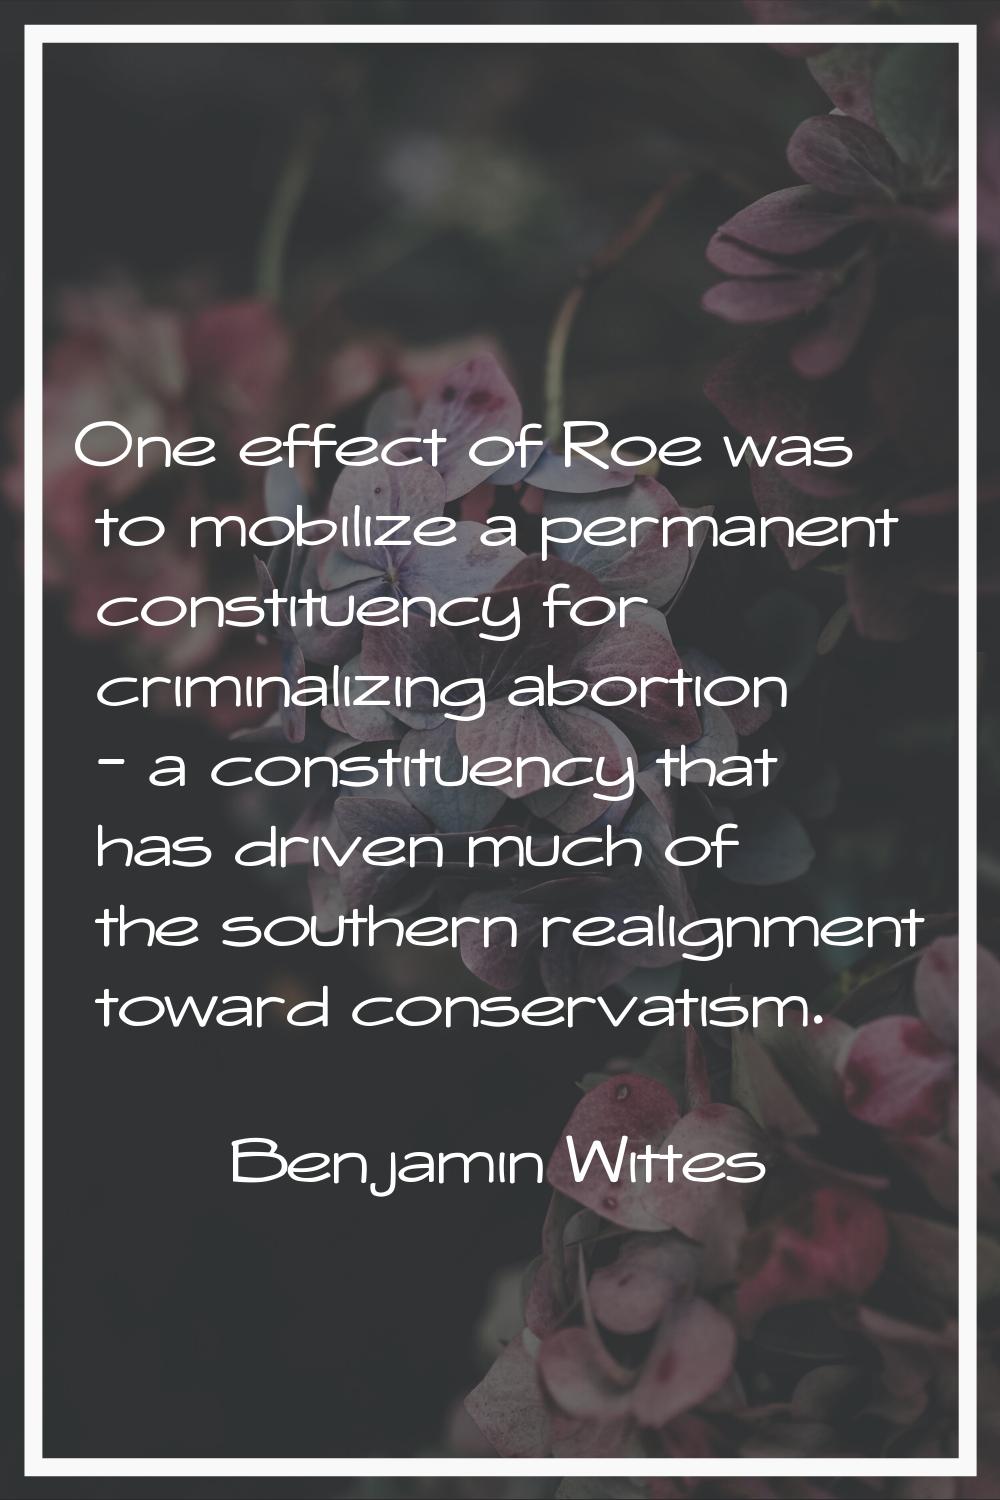 One effect of Roe was to mobilize a permanent constituency for criminalizing abortion - a constitue